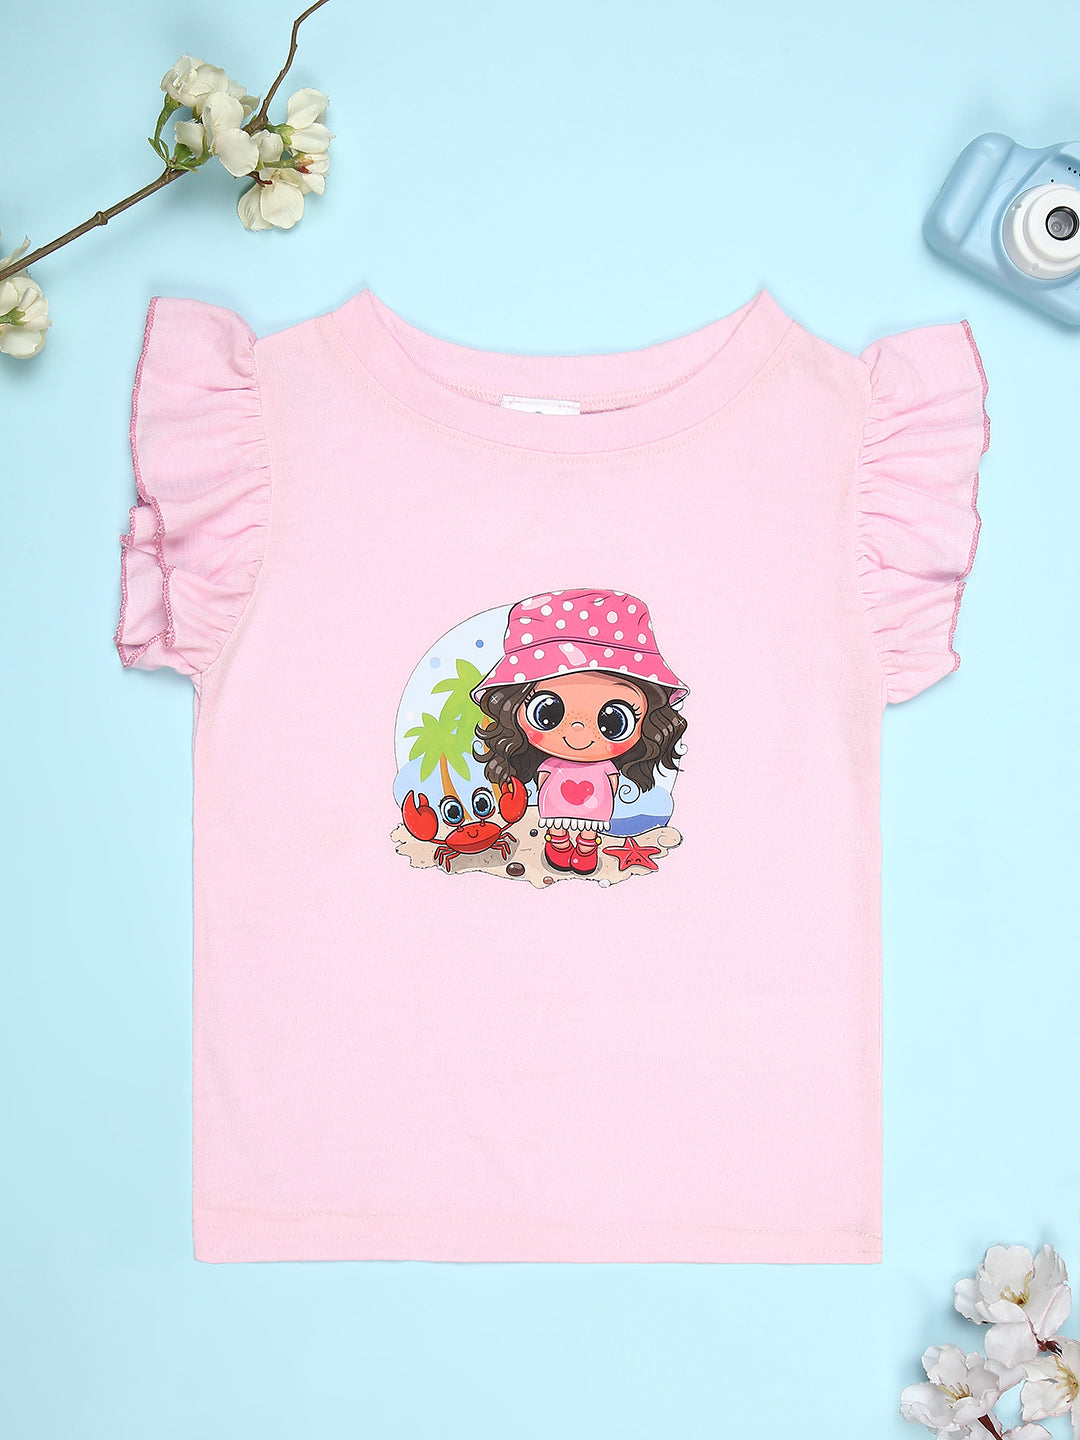 Cutiekins Girls Graphic Print T-Shirt With Solid Embellished Bow Short -Light Pink & Magenta Pink